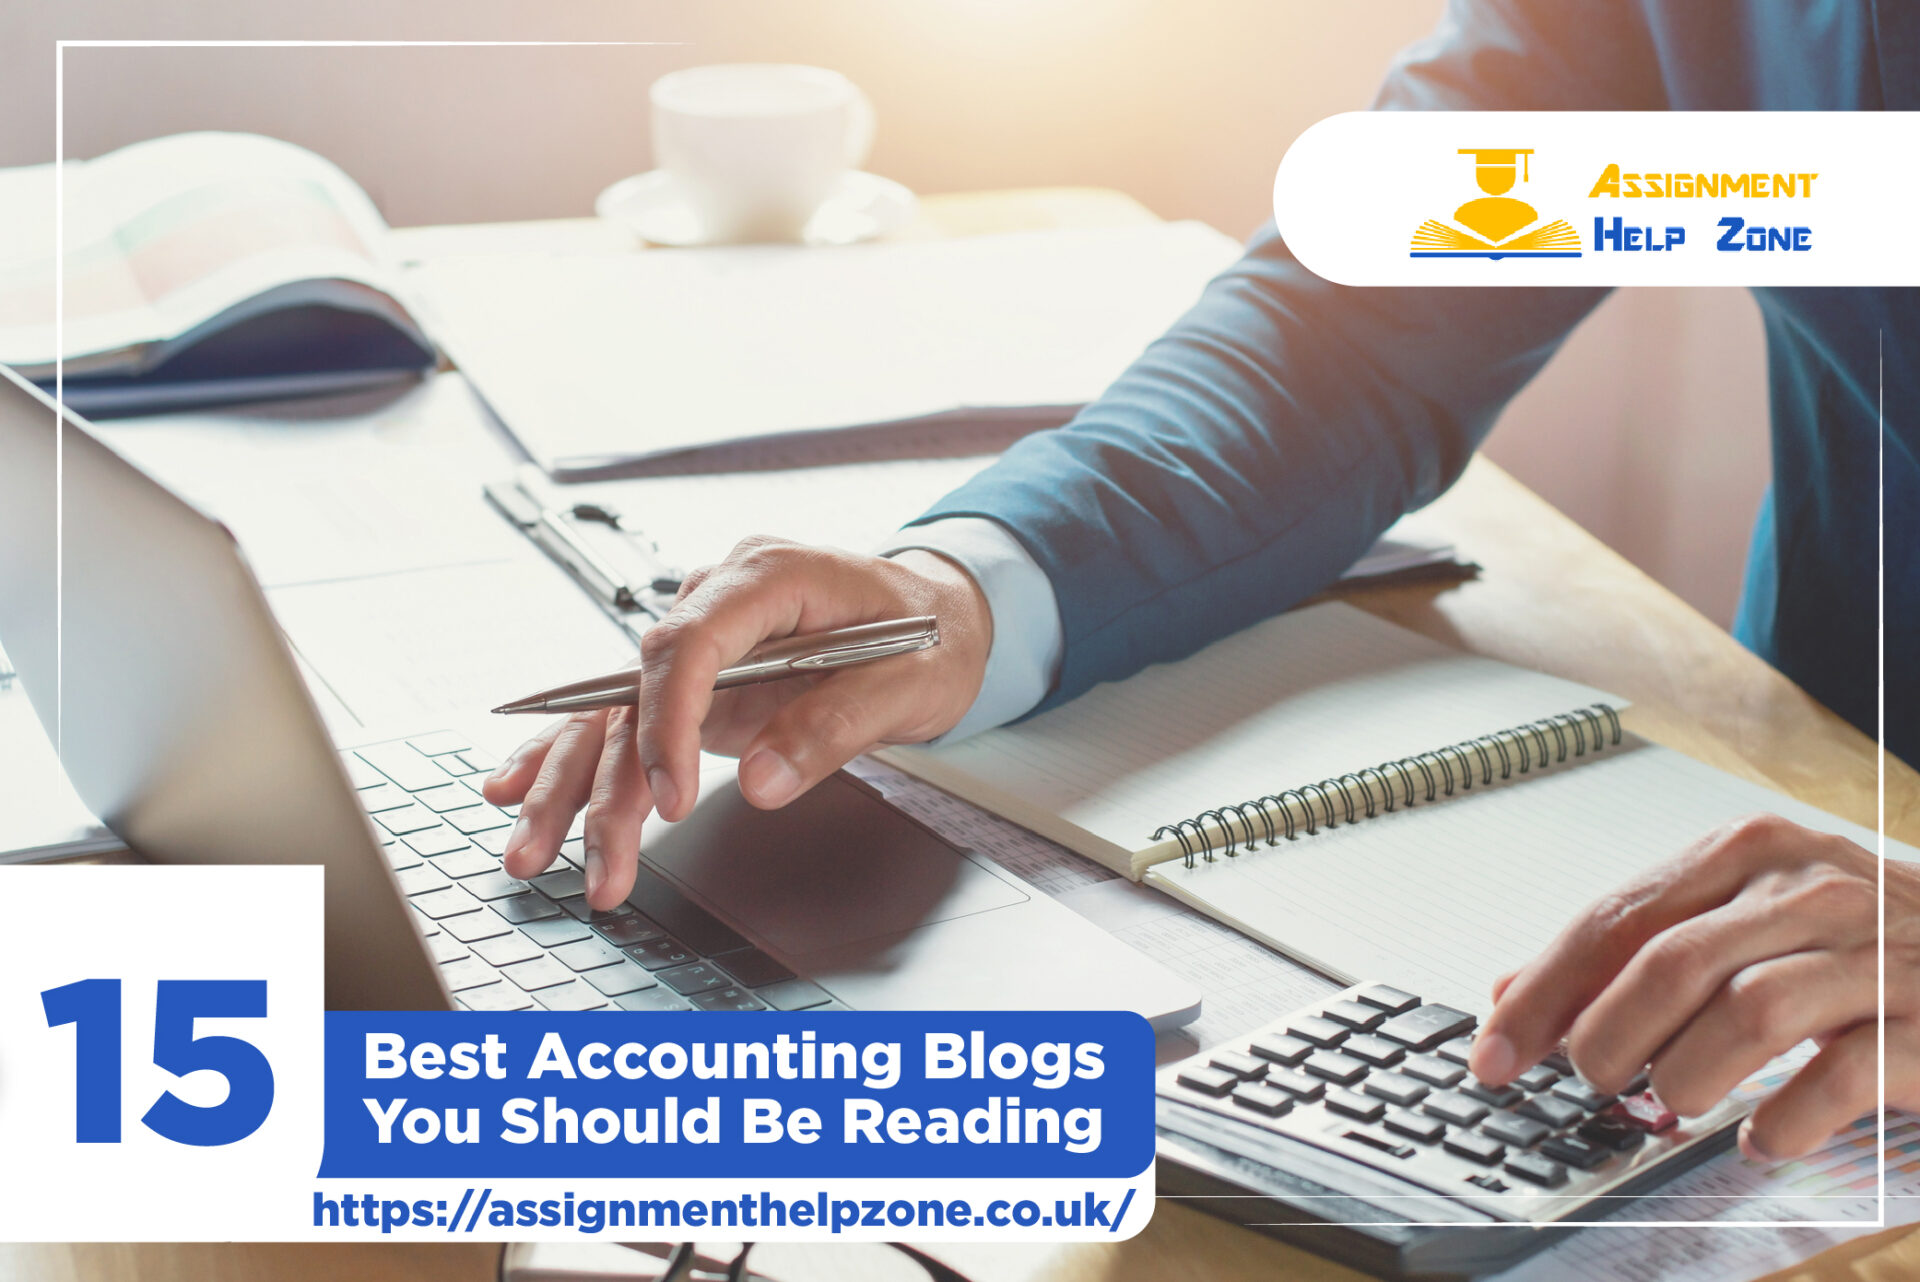 15 Best Accounting Blogs You Should Be Reading